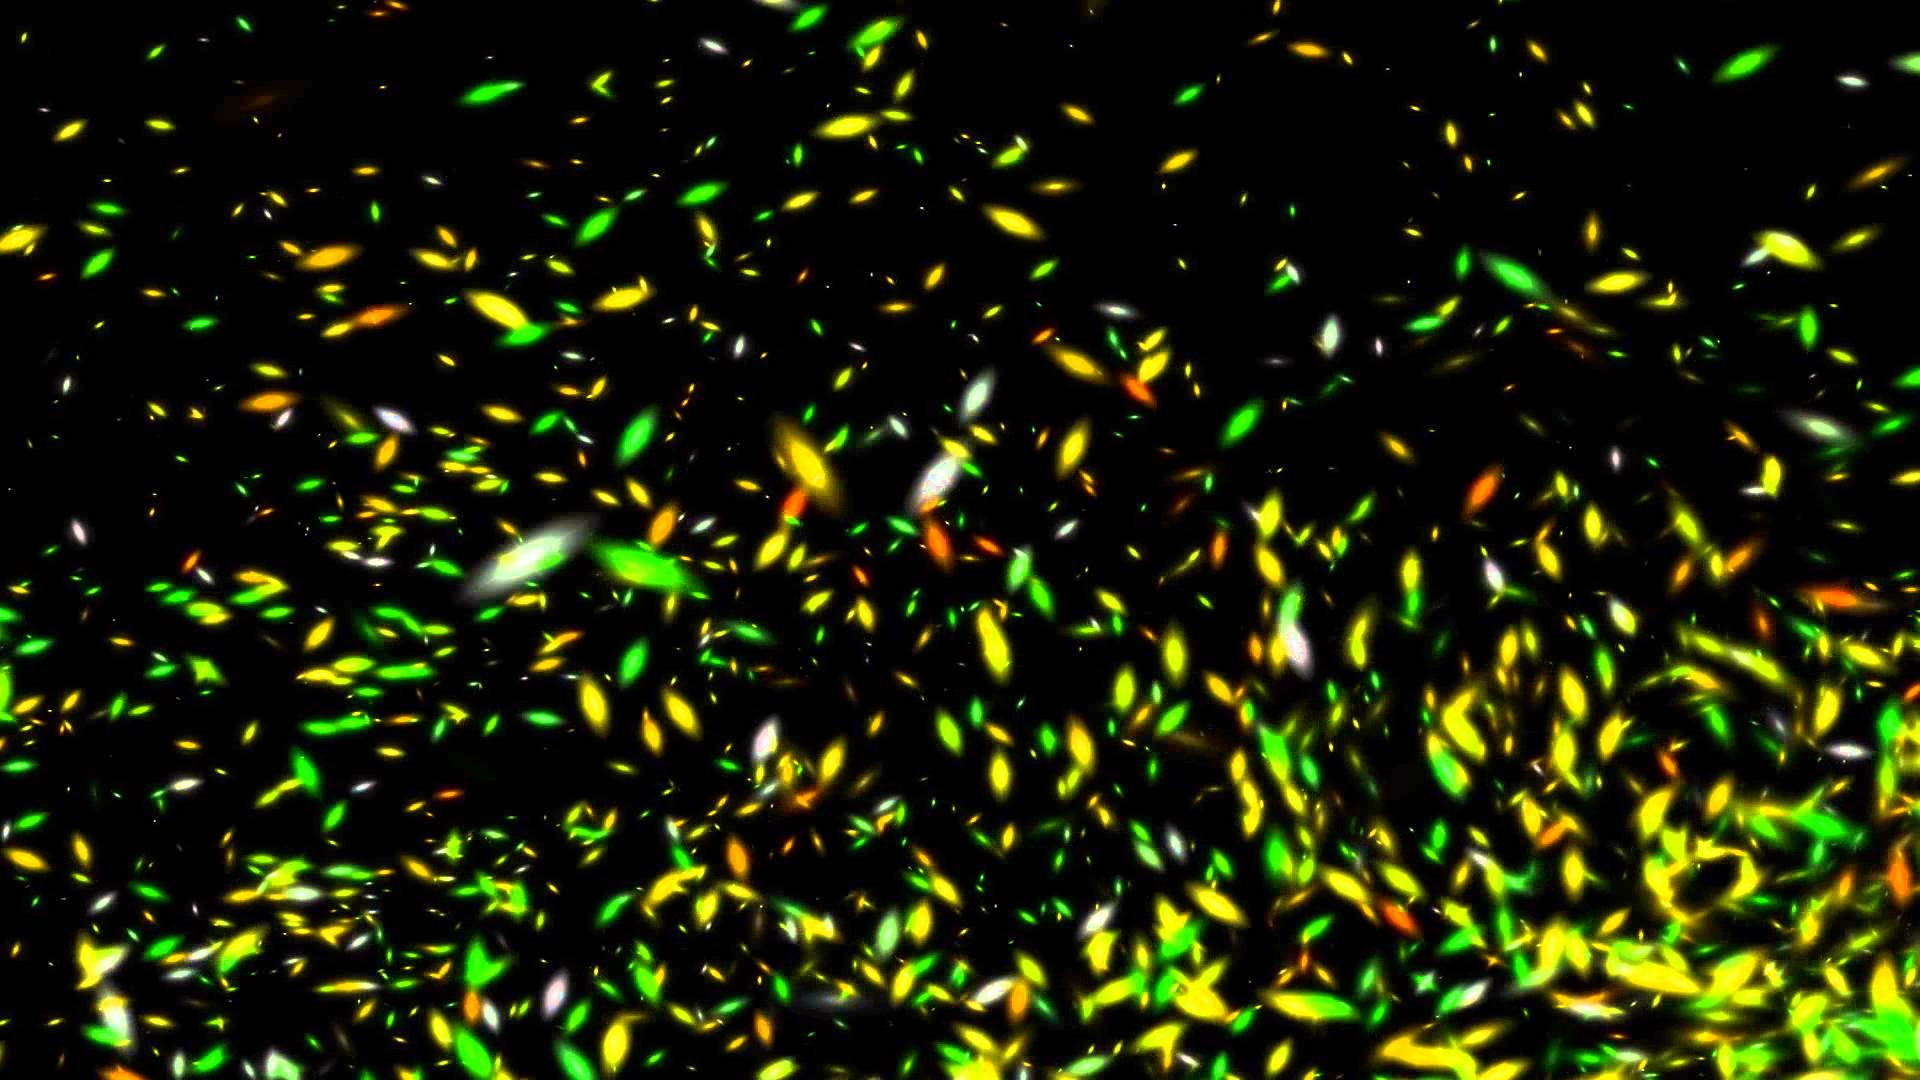 Sparkles Green & Yellow Black Background ANIMATION FREE FOOTAGE HD